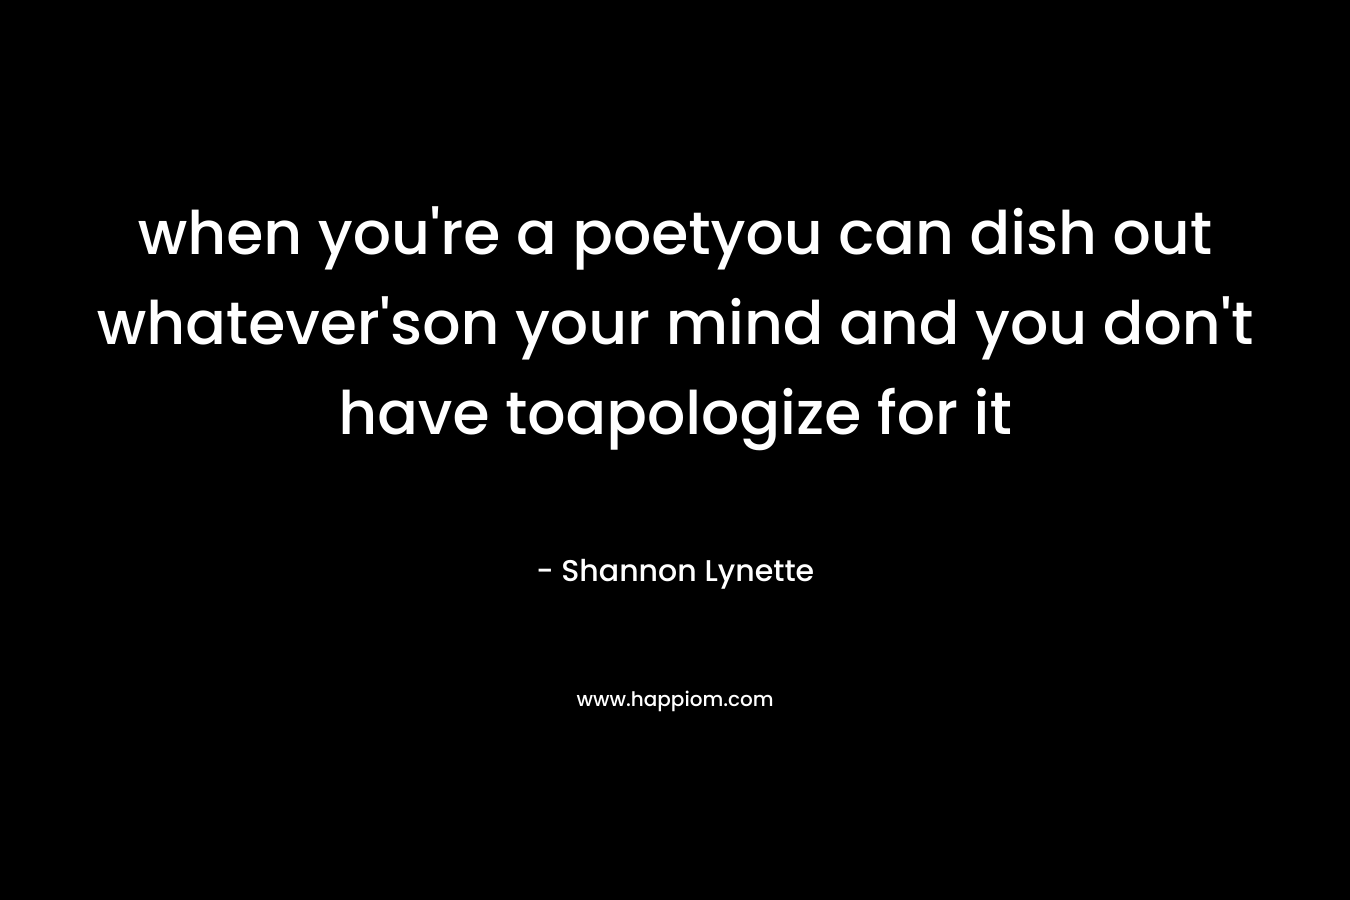 when you’re a poetyou can dish out whatever’son your mind and you don’t have toapologize for it – Shannon Lynette